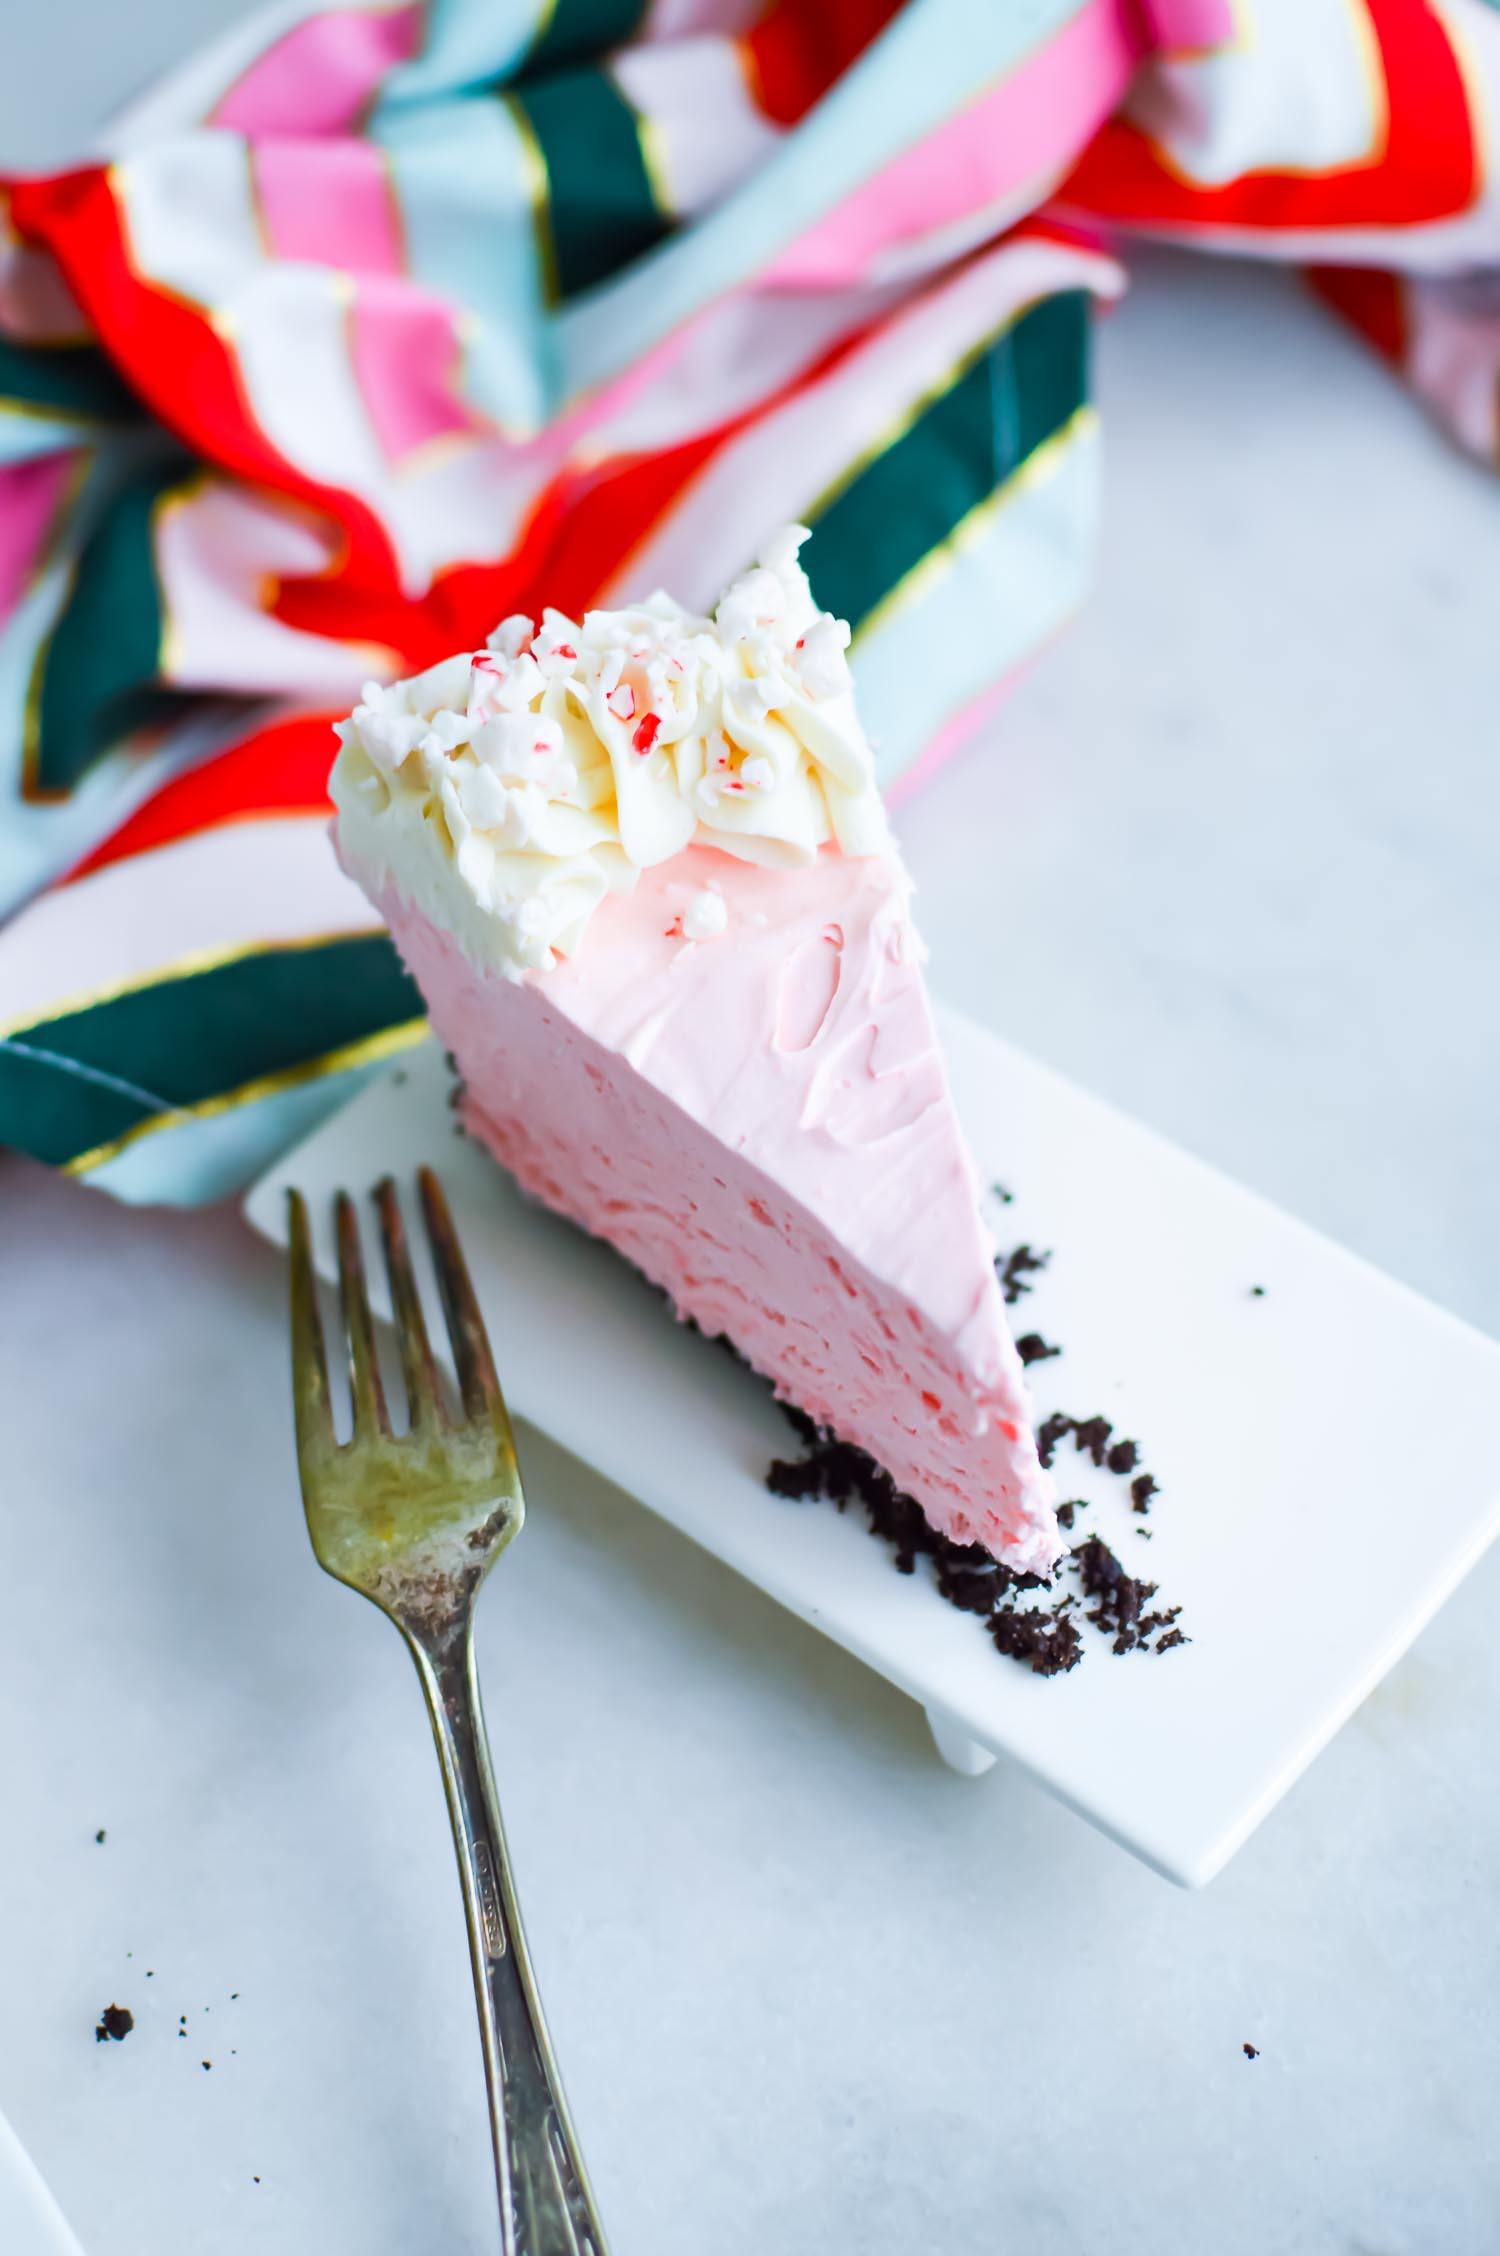 A slice of holiday dessert with a silver fork and a colorful towel.